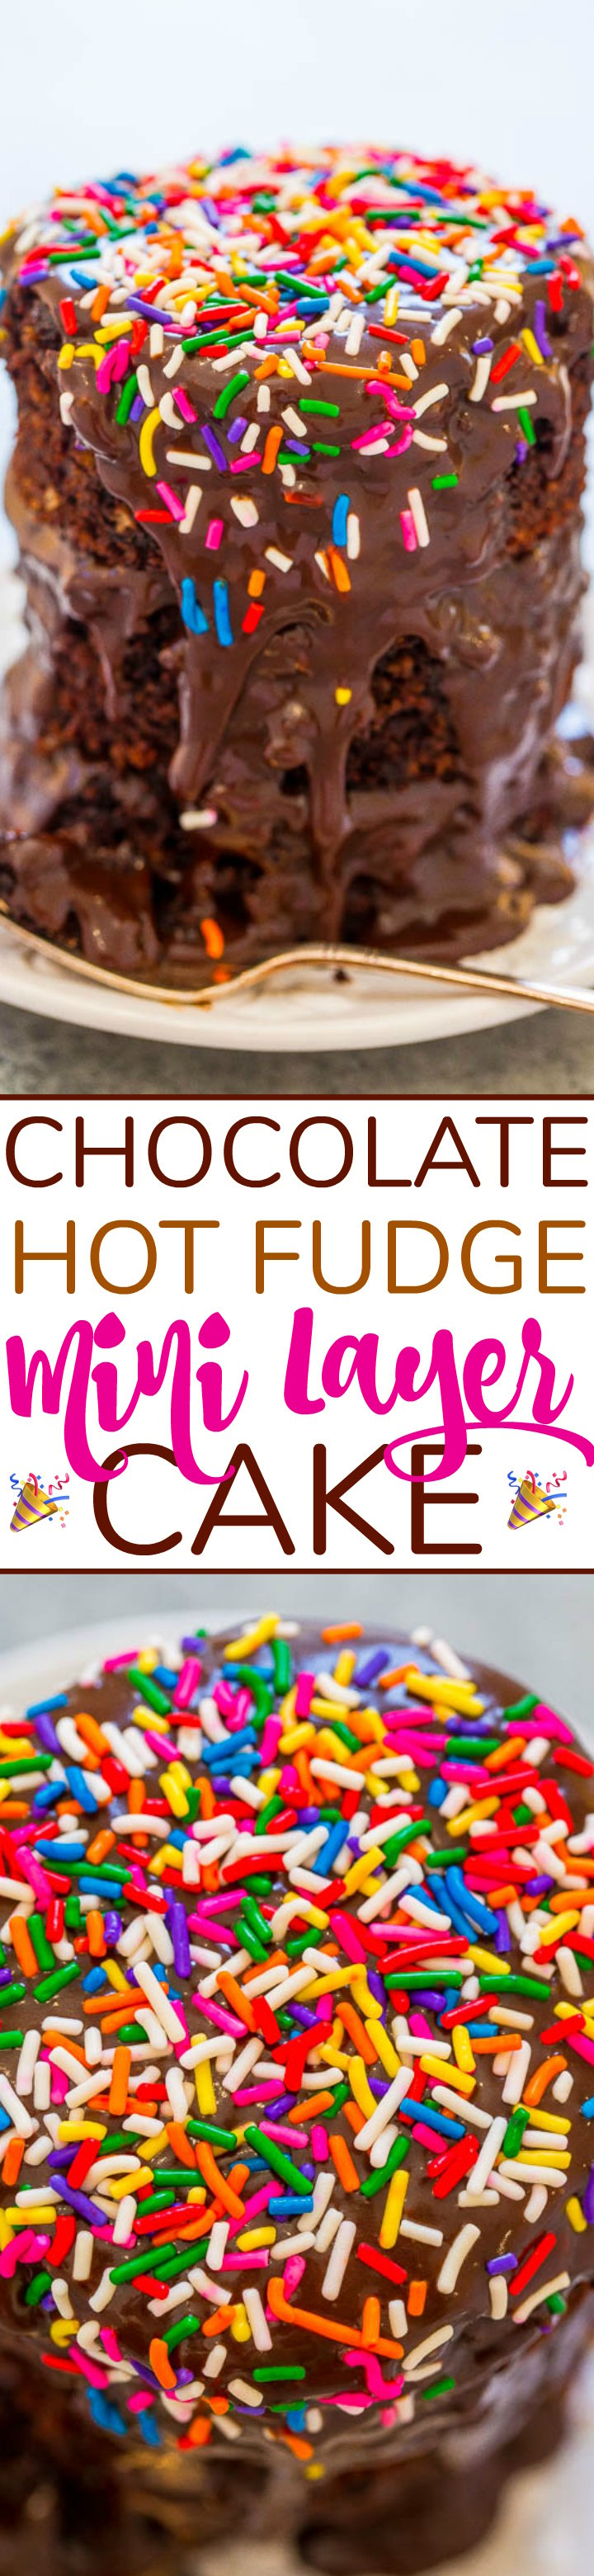 Chocolate Hot Fudge Mini Layer Cake - Rich, decadent, over-the-top fudgy cake that uses hot fudge instead of frosting!! You don't need special pans for this EASY, no-mixer, mini cake that's perfect for special events!!